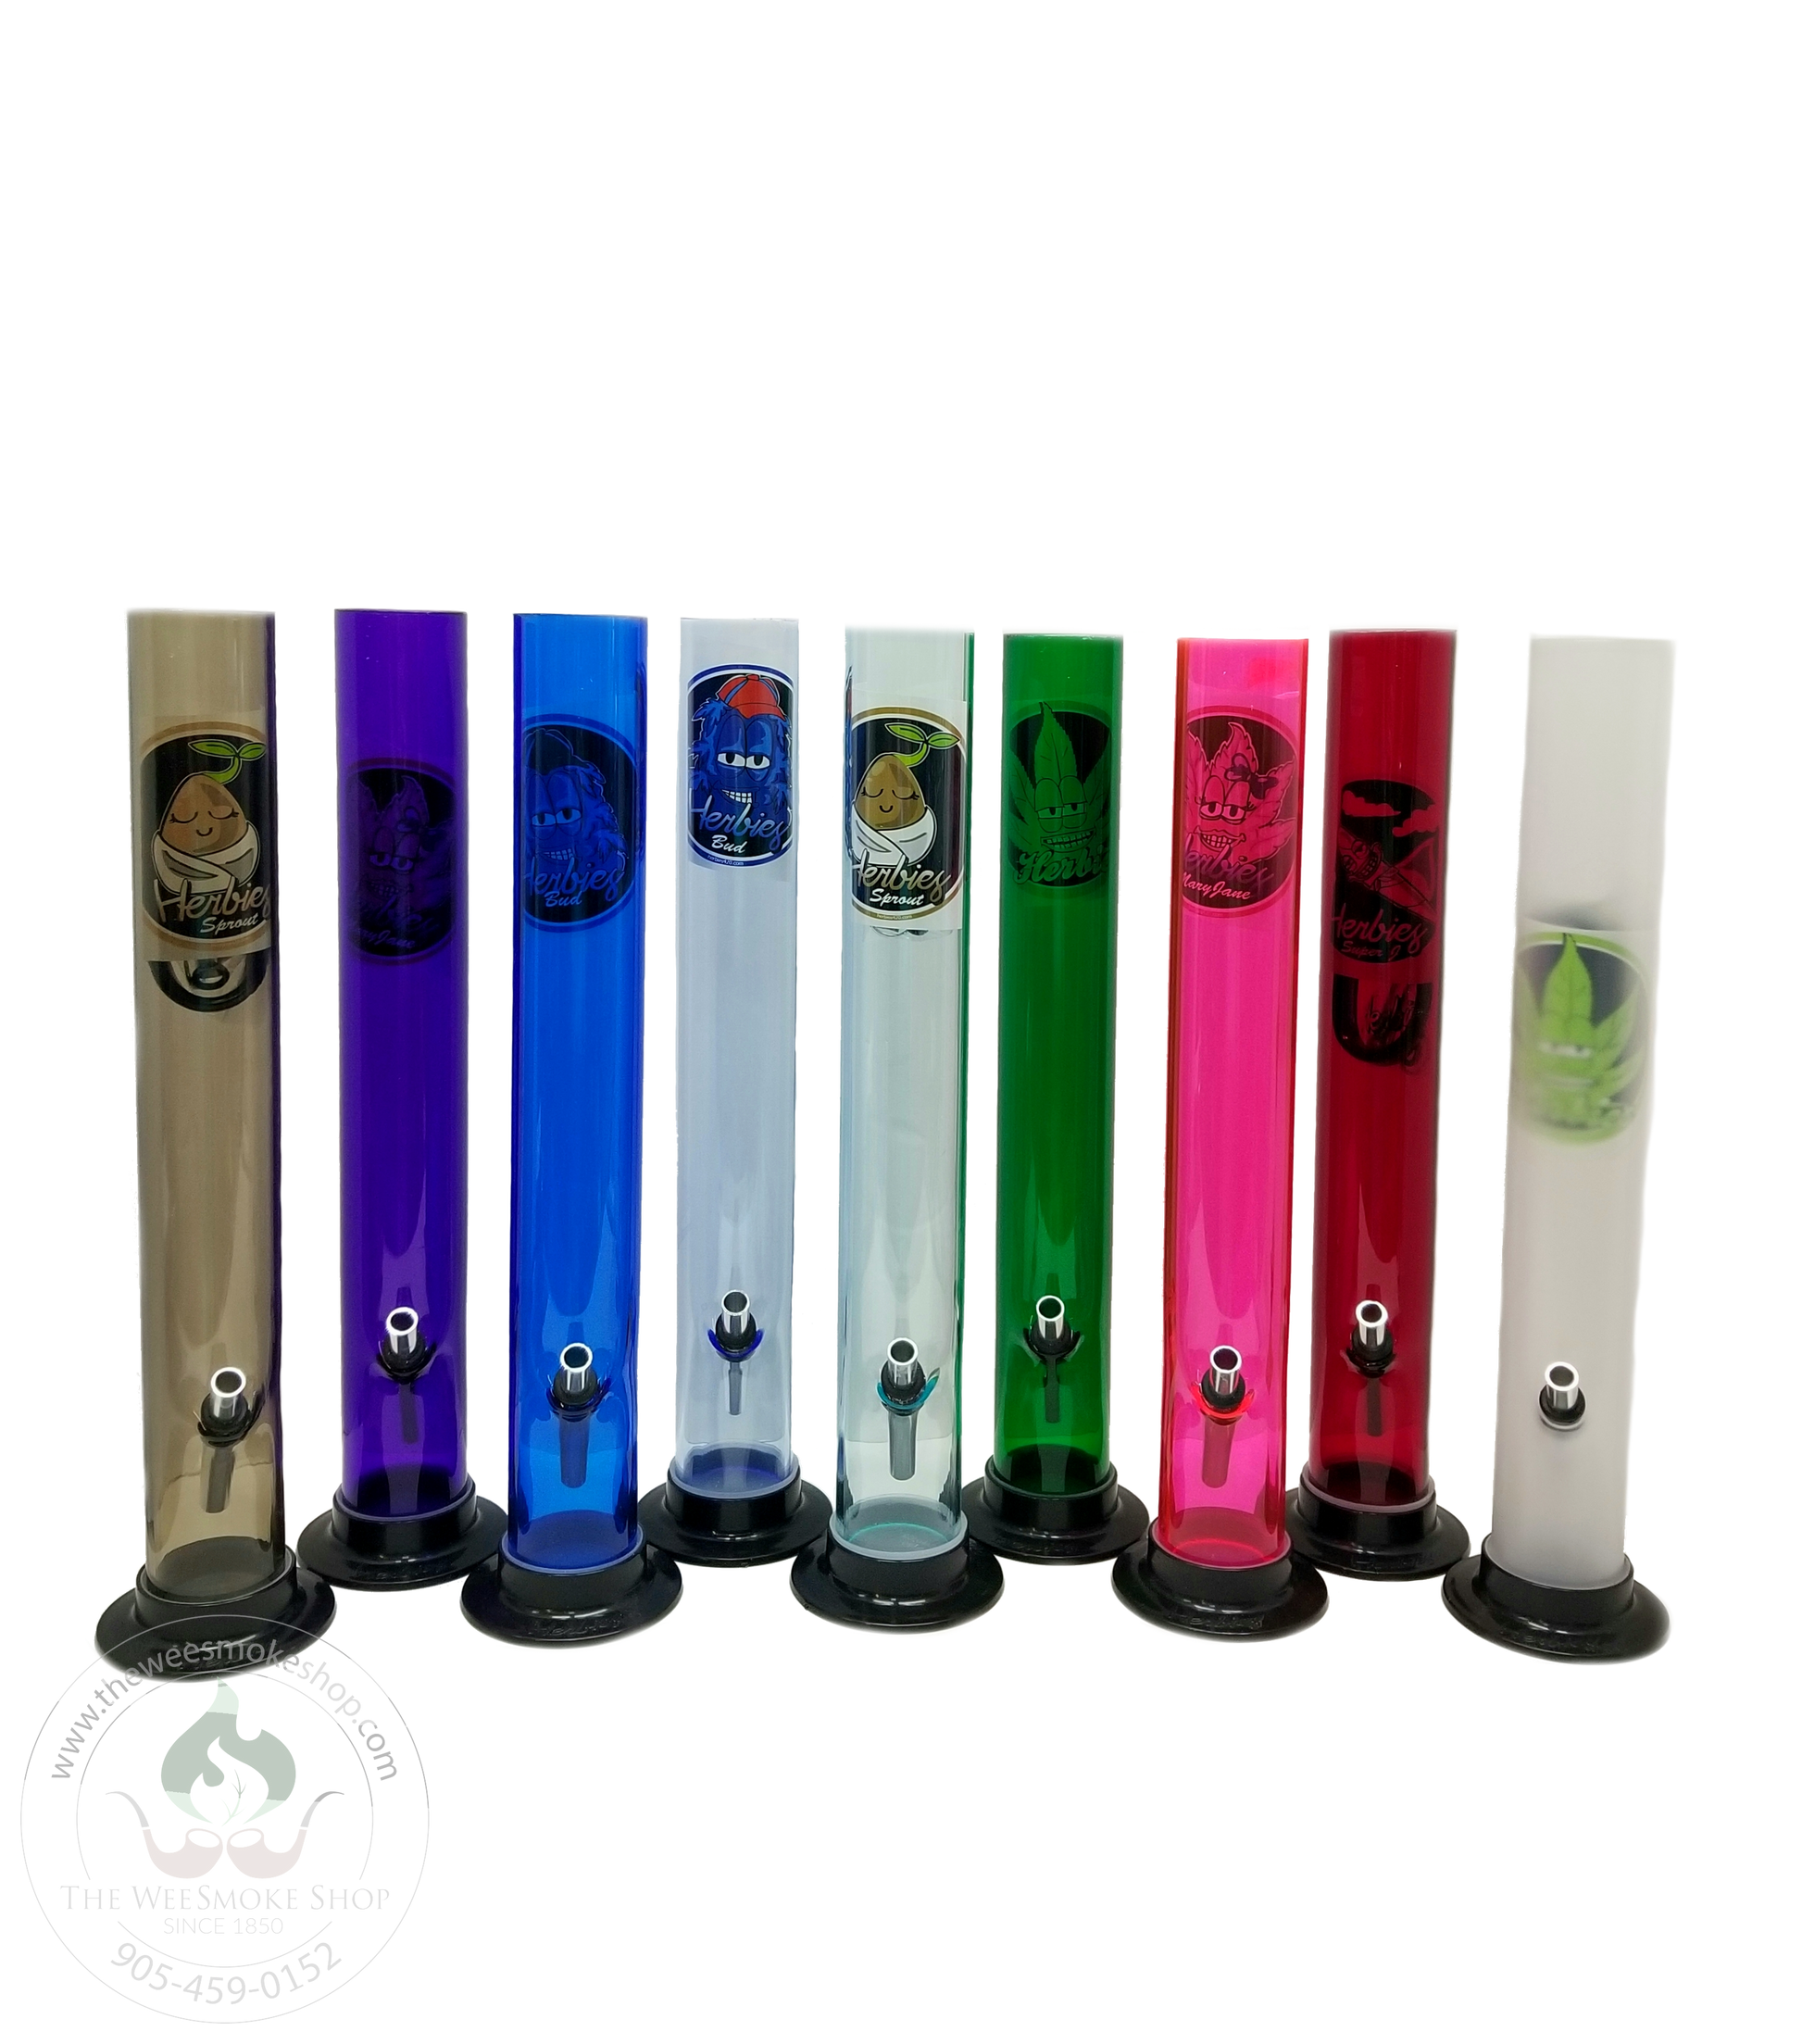 Herbies 15" Acrylic Straight Shooter Bong - All Colours - The Wee Smoke Shop